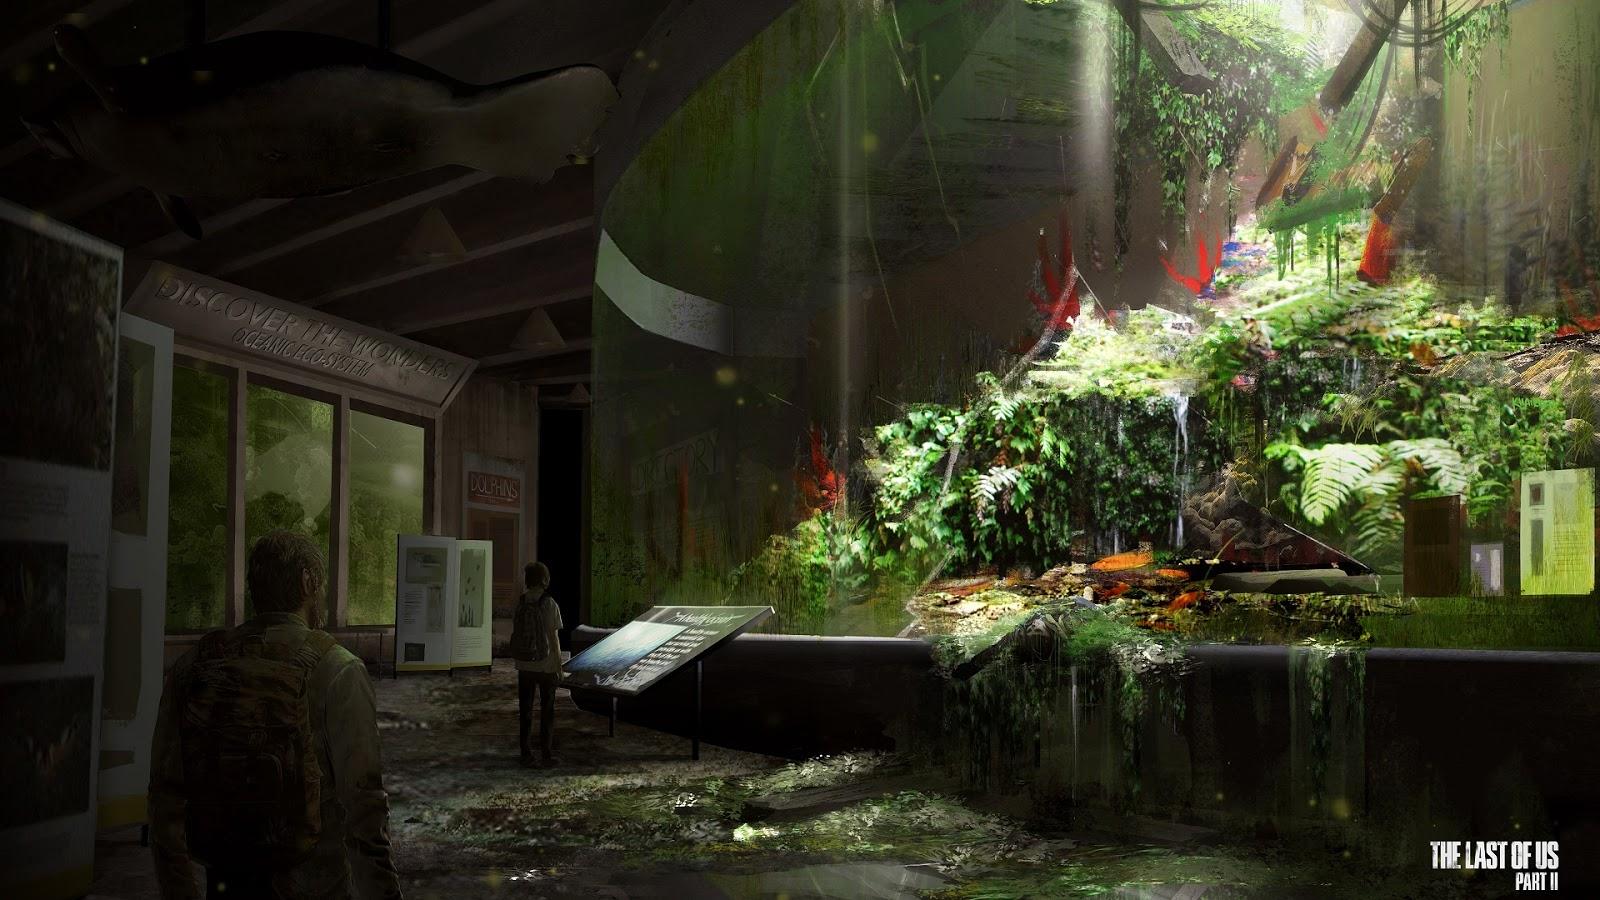 Download The Last of Us 2 HD Wallpaper